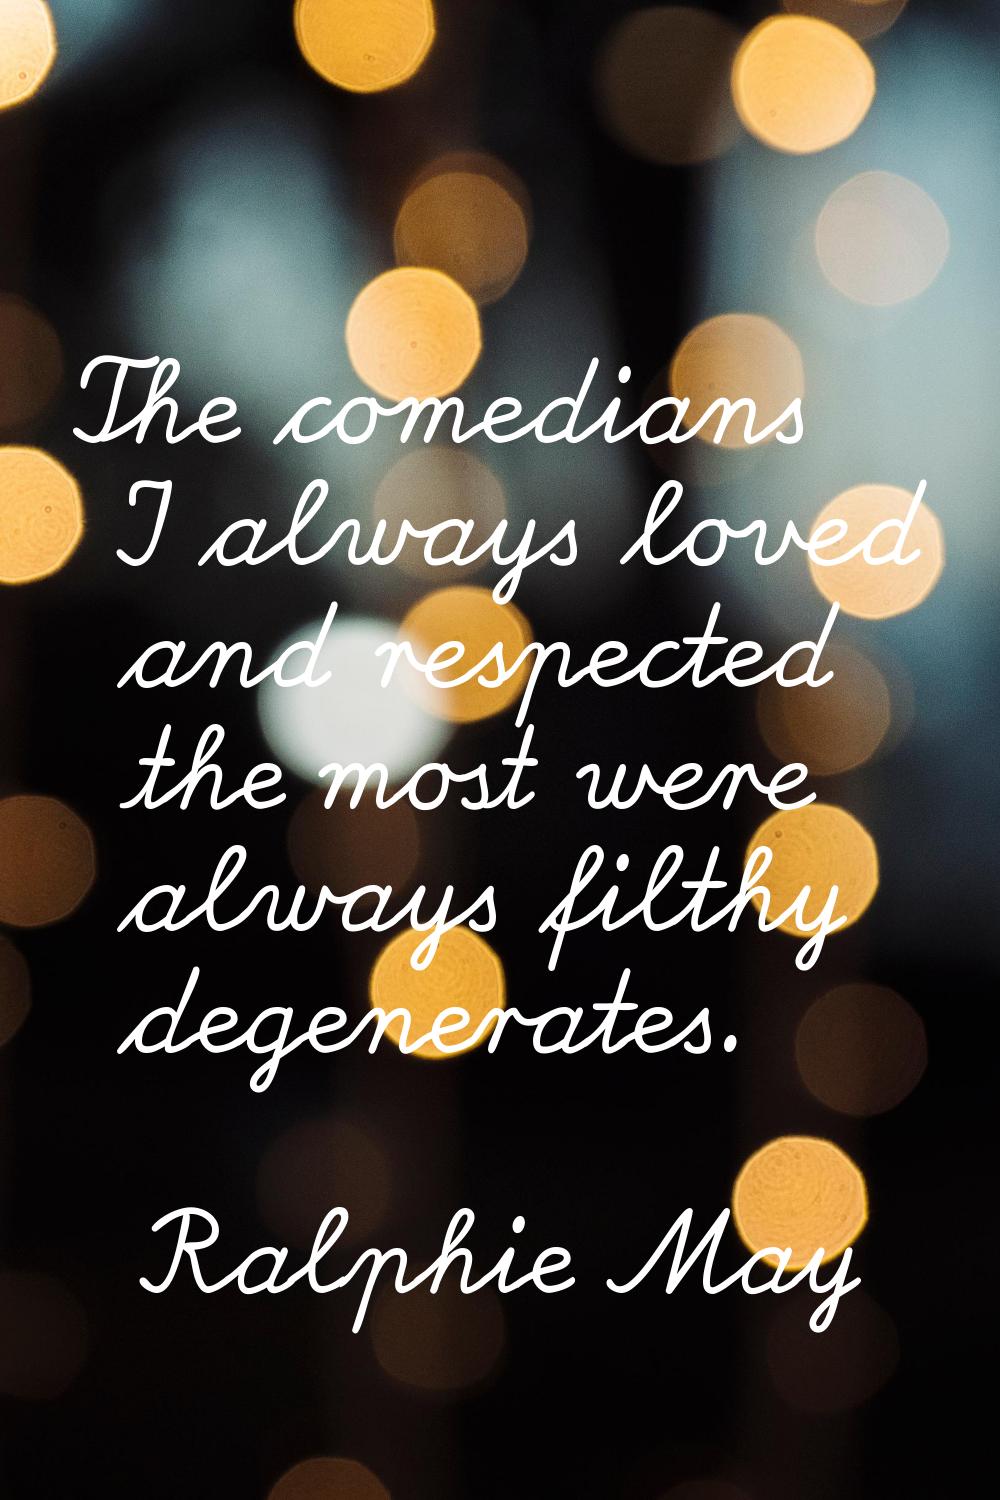 The comedians I always loved and respected the most were always filthy degenerates.